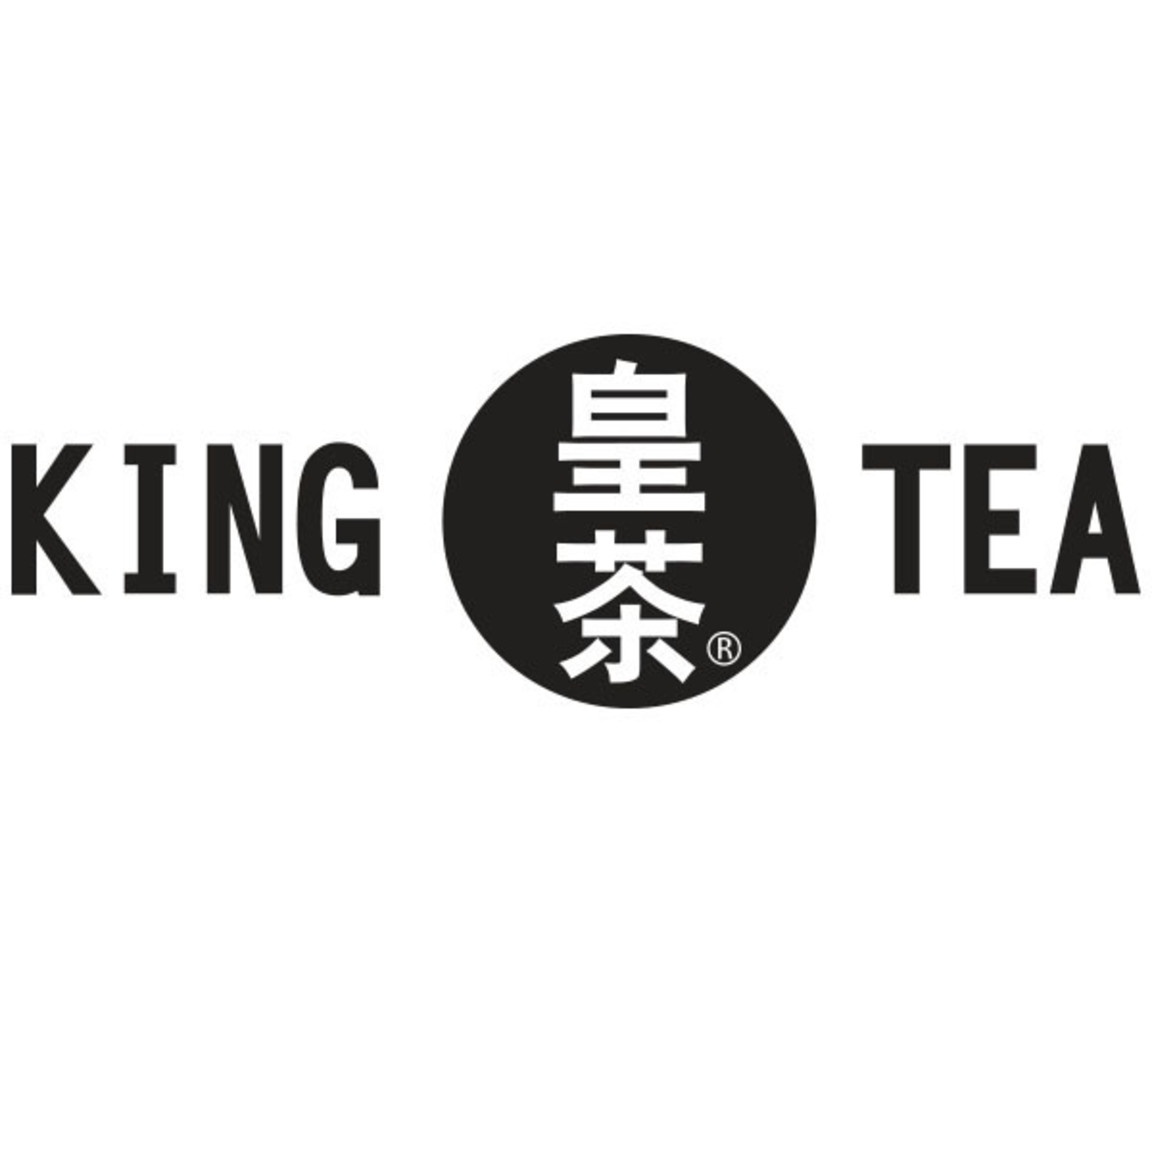 King Tea Deals, Vouchers and Coupons (August 2022) 46